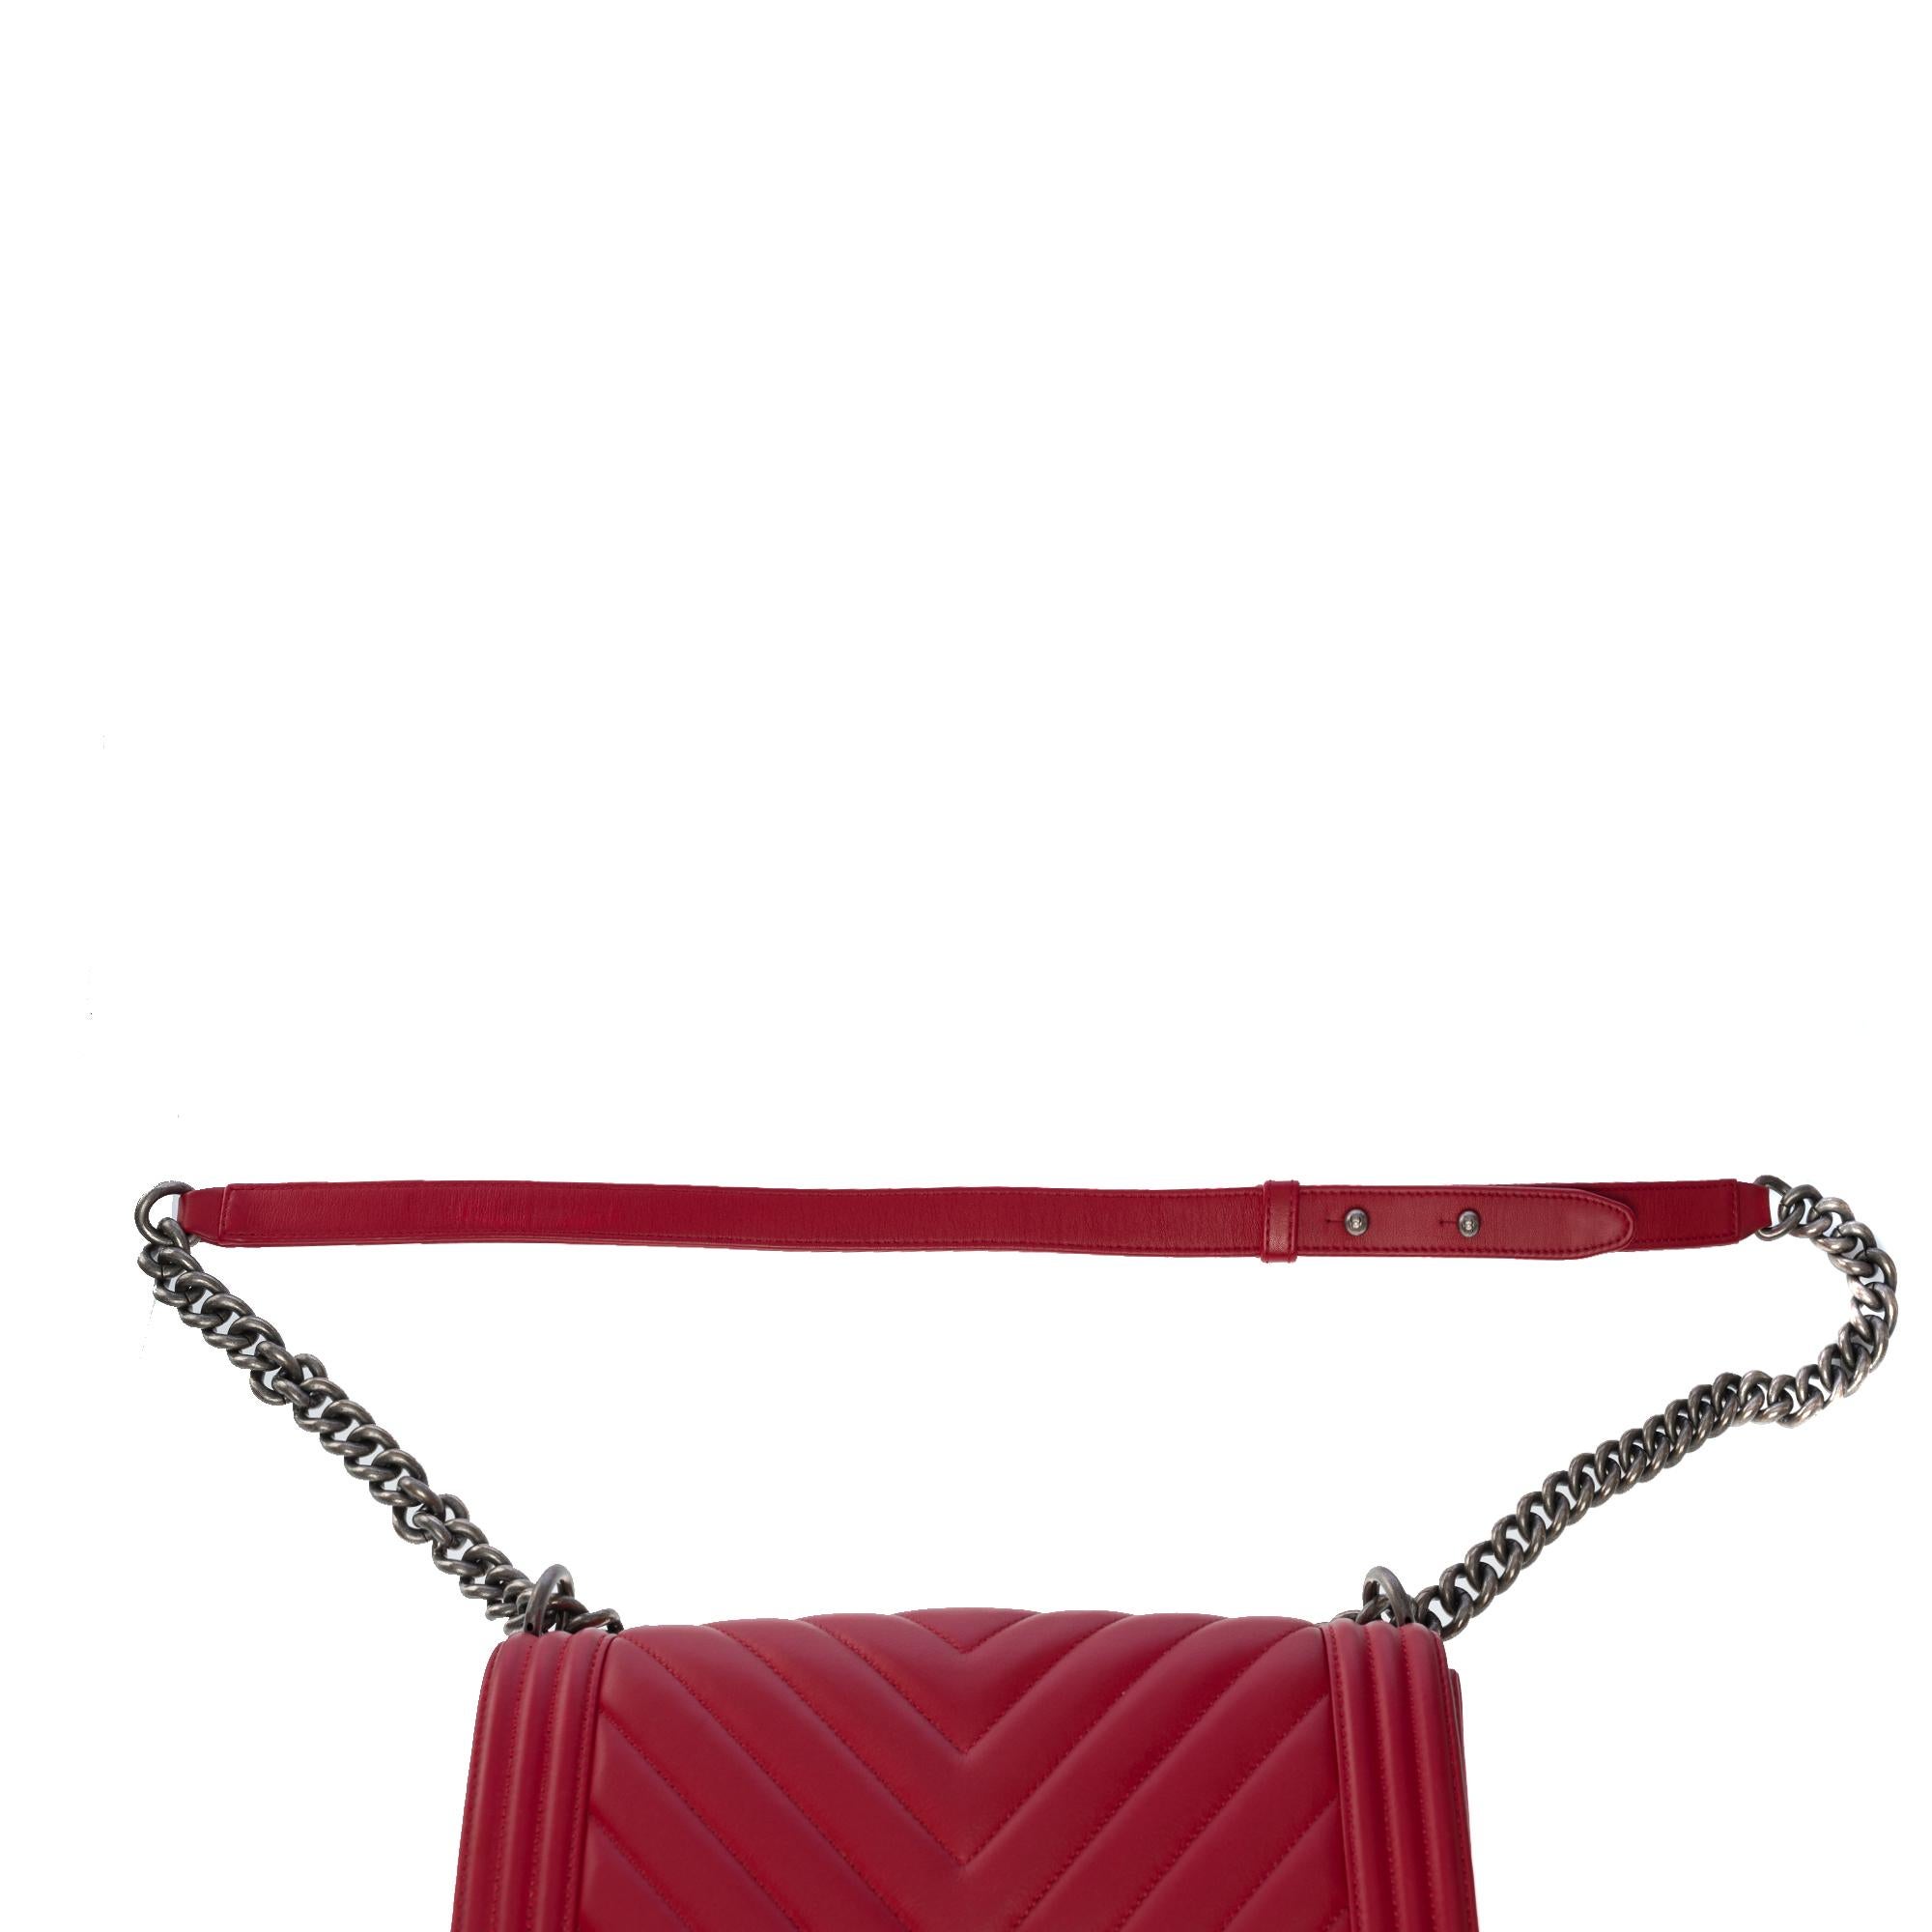 Chanel Boy Old Medium shoulder bag in red quilted herringbone leather, SHW For Sale 5